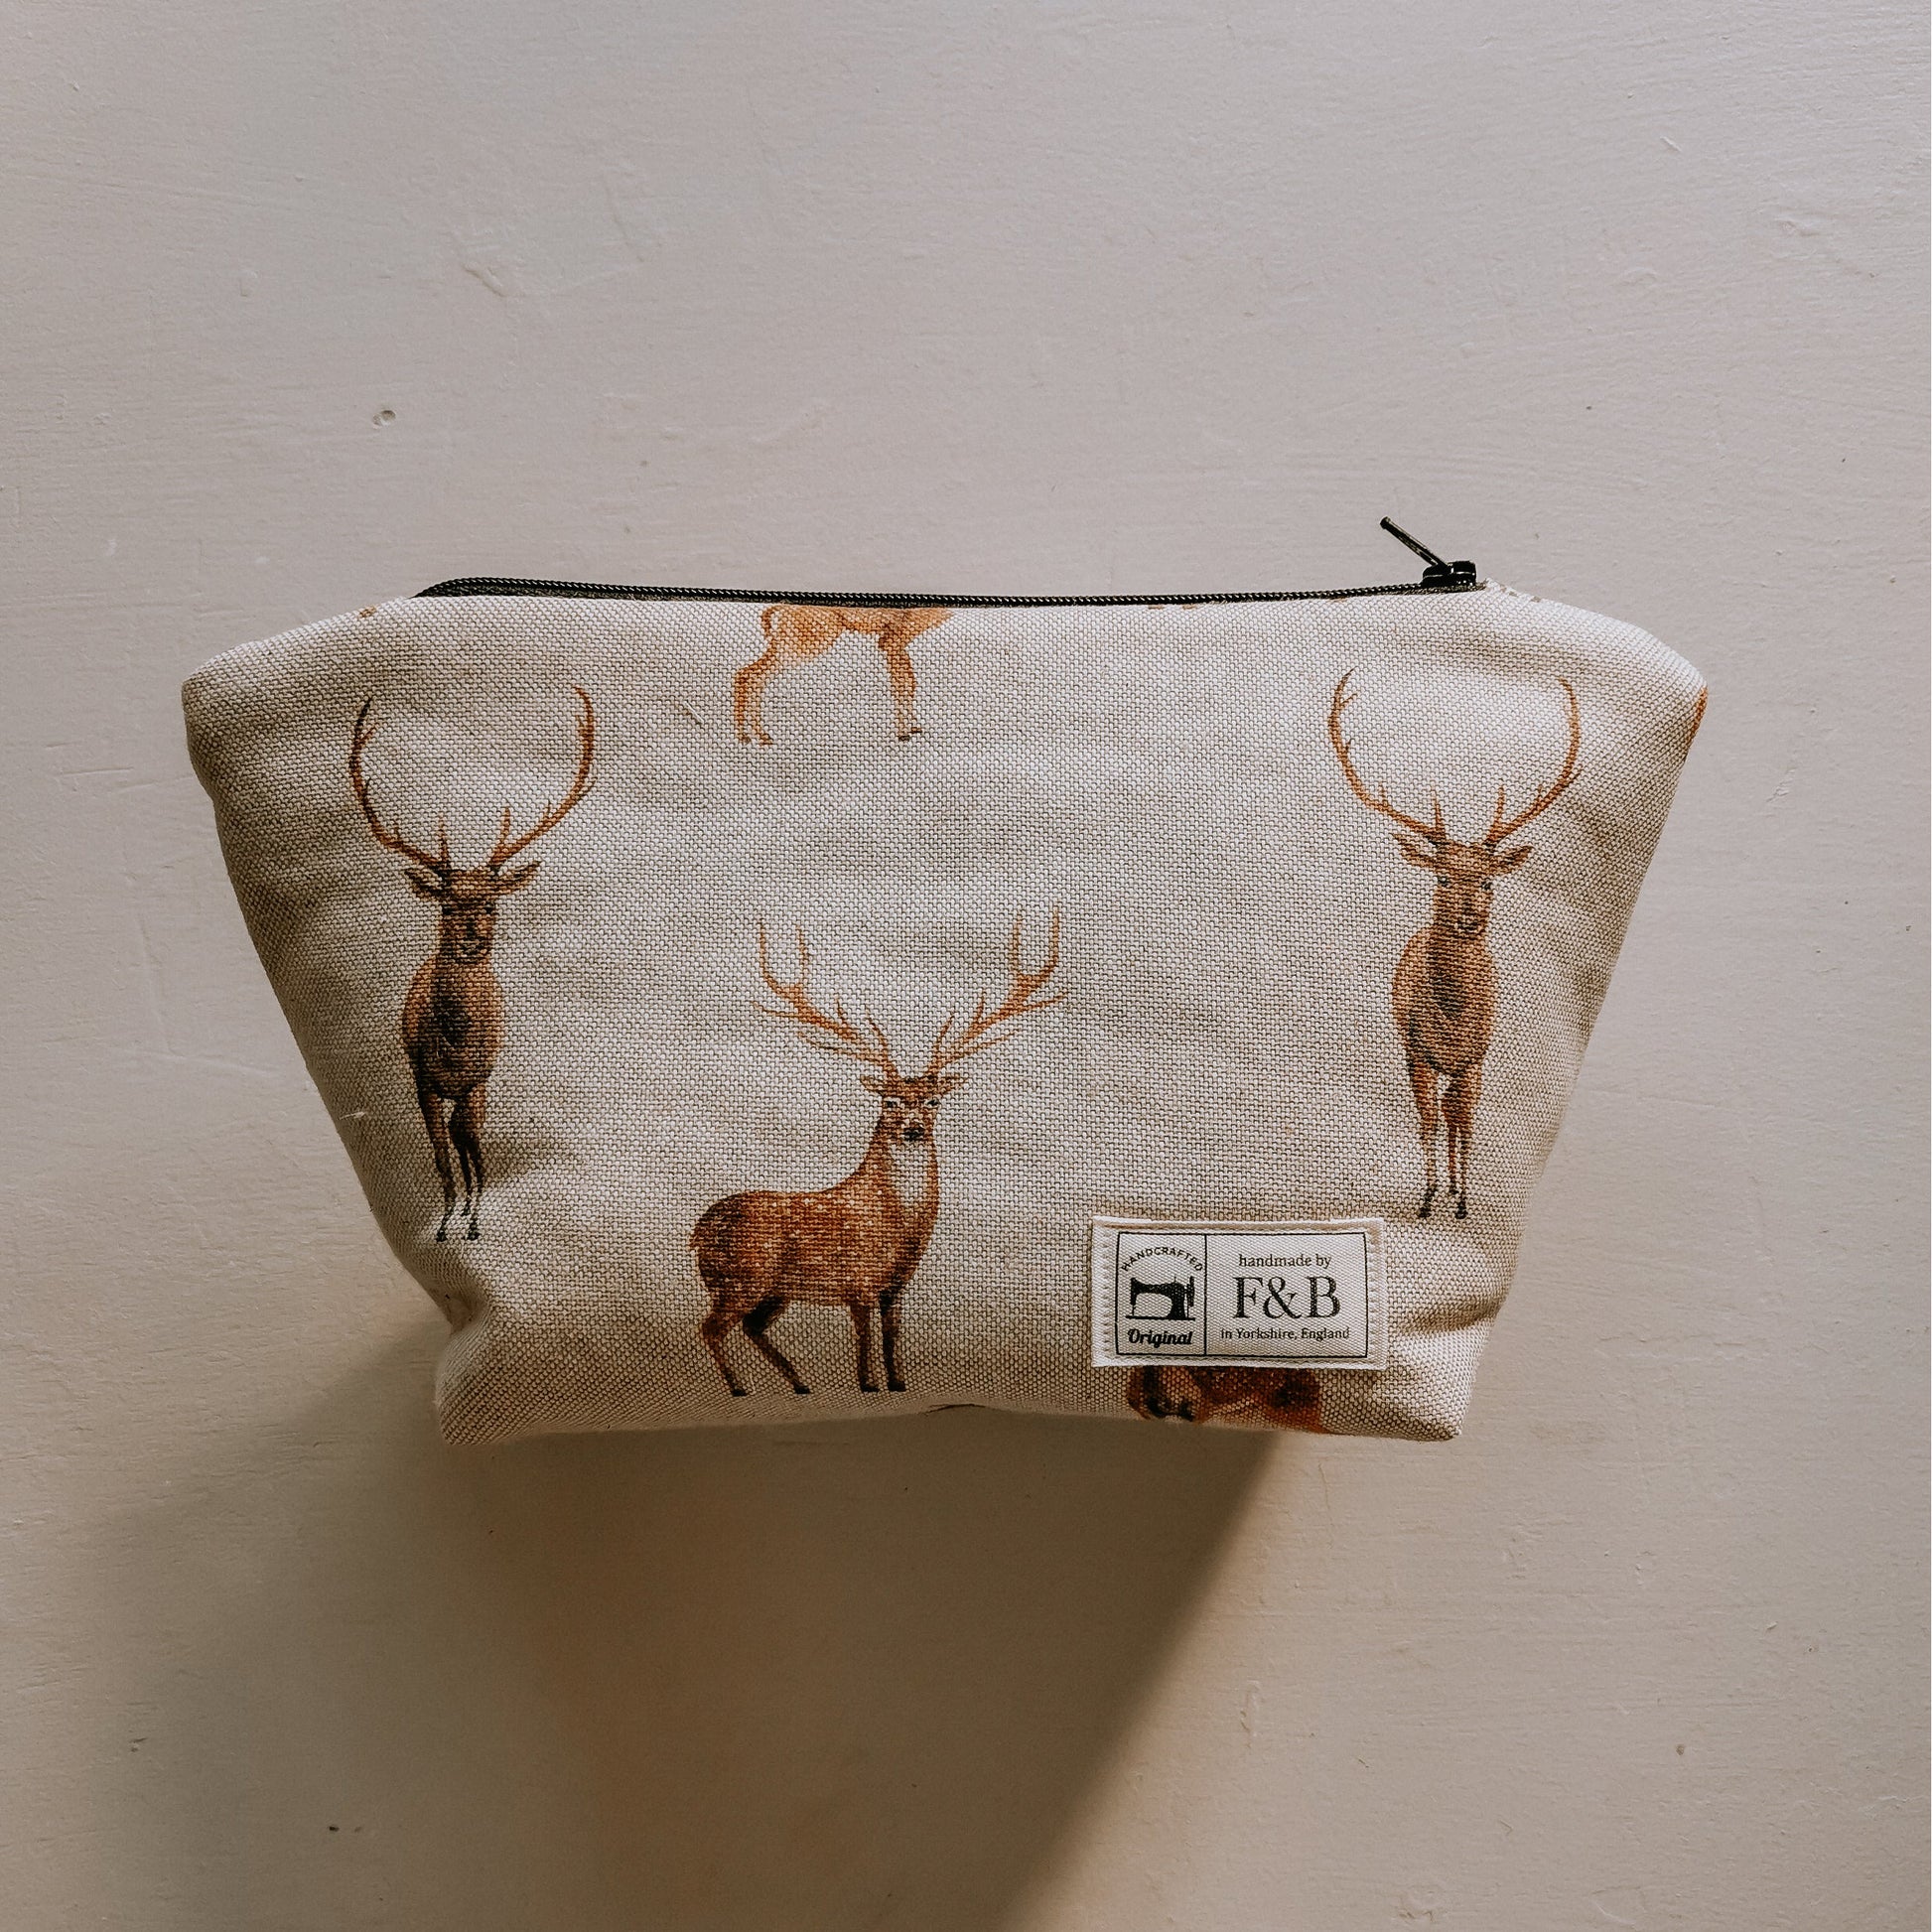 Deer Print washbags featuring doe, stags and fawns on a lovely linen fabric - handmade by F&B in Yorkshire